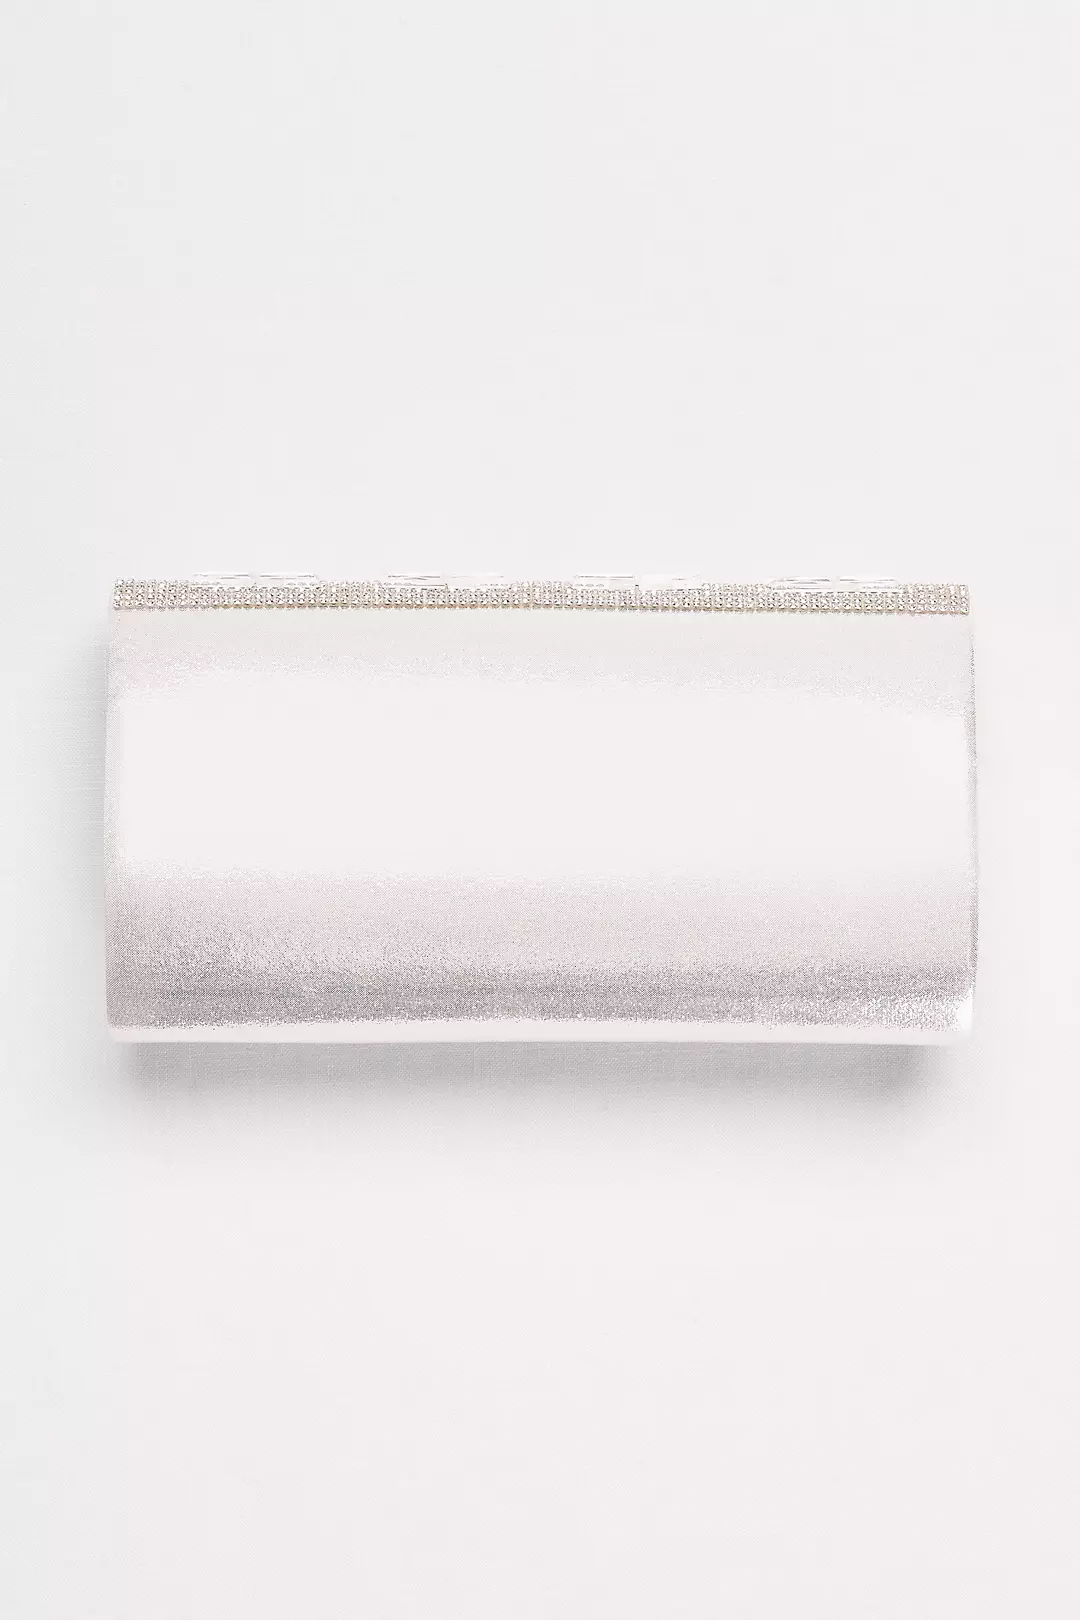 Shimmer Fabric Clutch with Crystal-Encrusted Flap Image 2